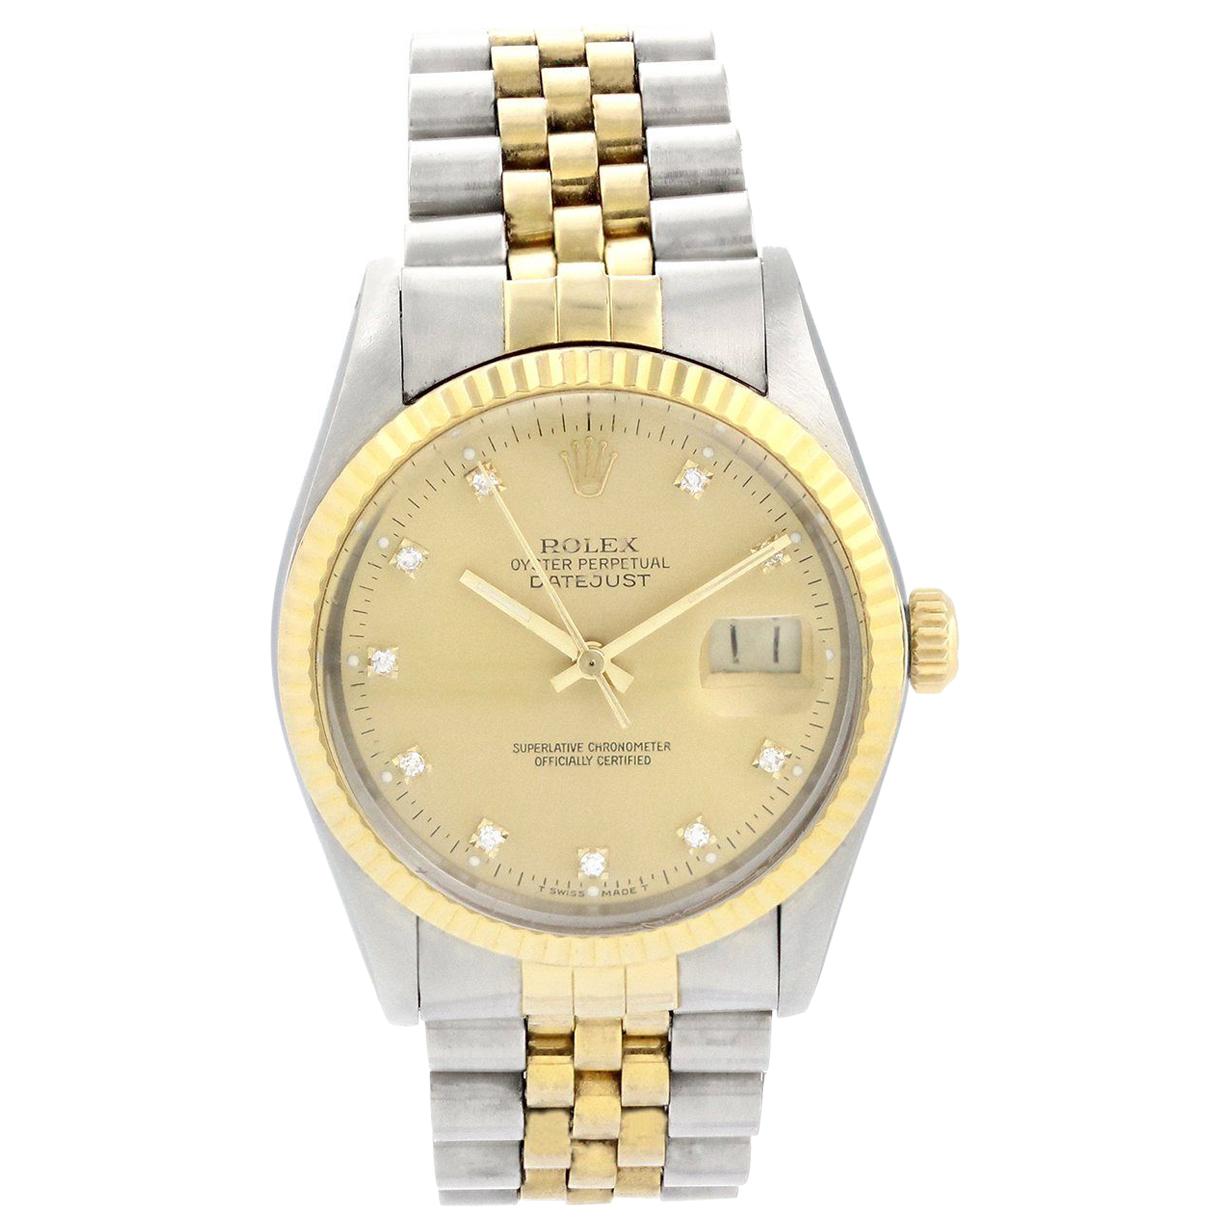 Rolex Datejust 16013 Diamond Dial Men's Watch Box Papers For Sale